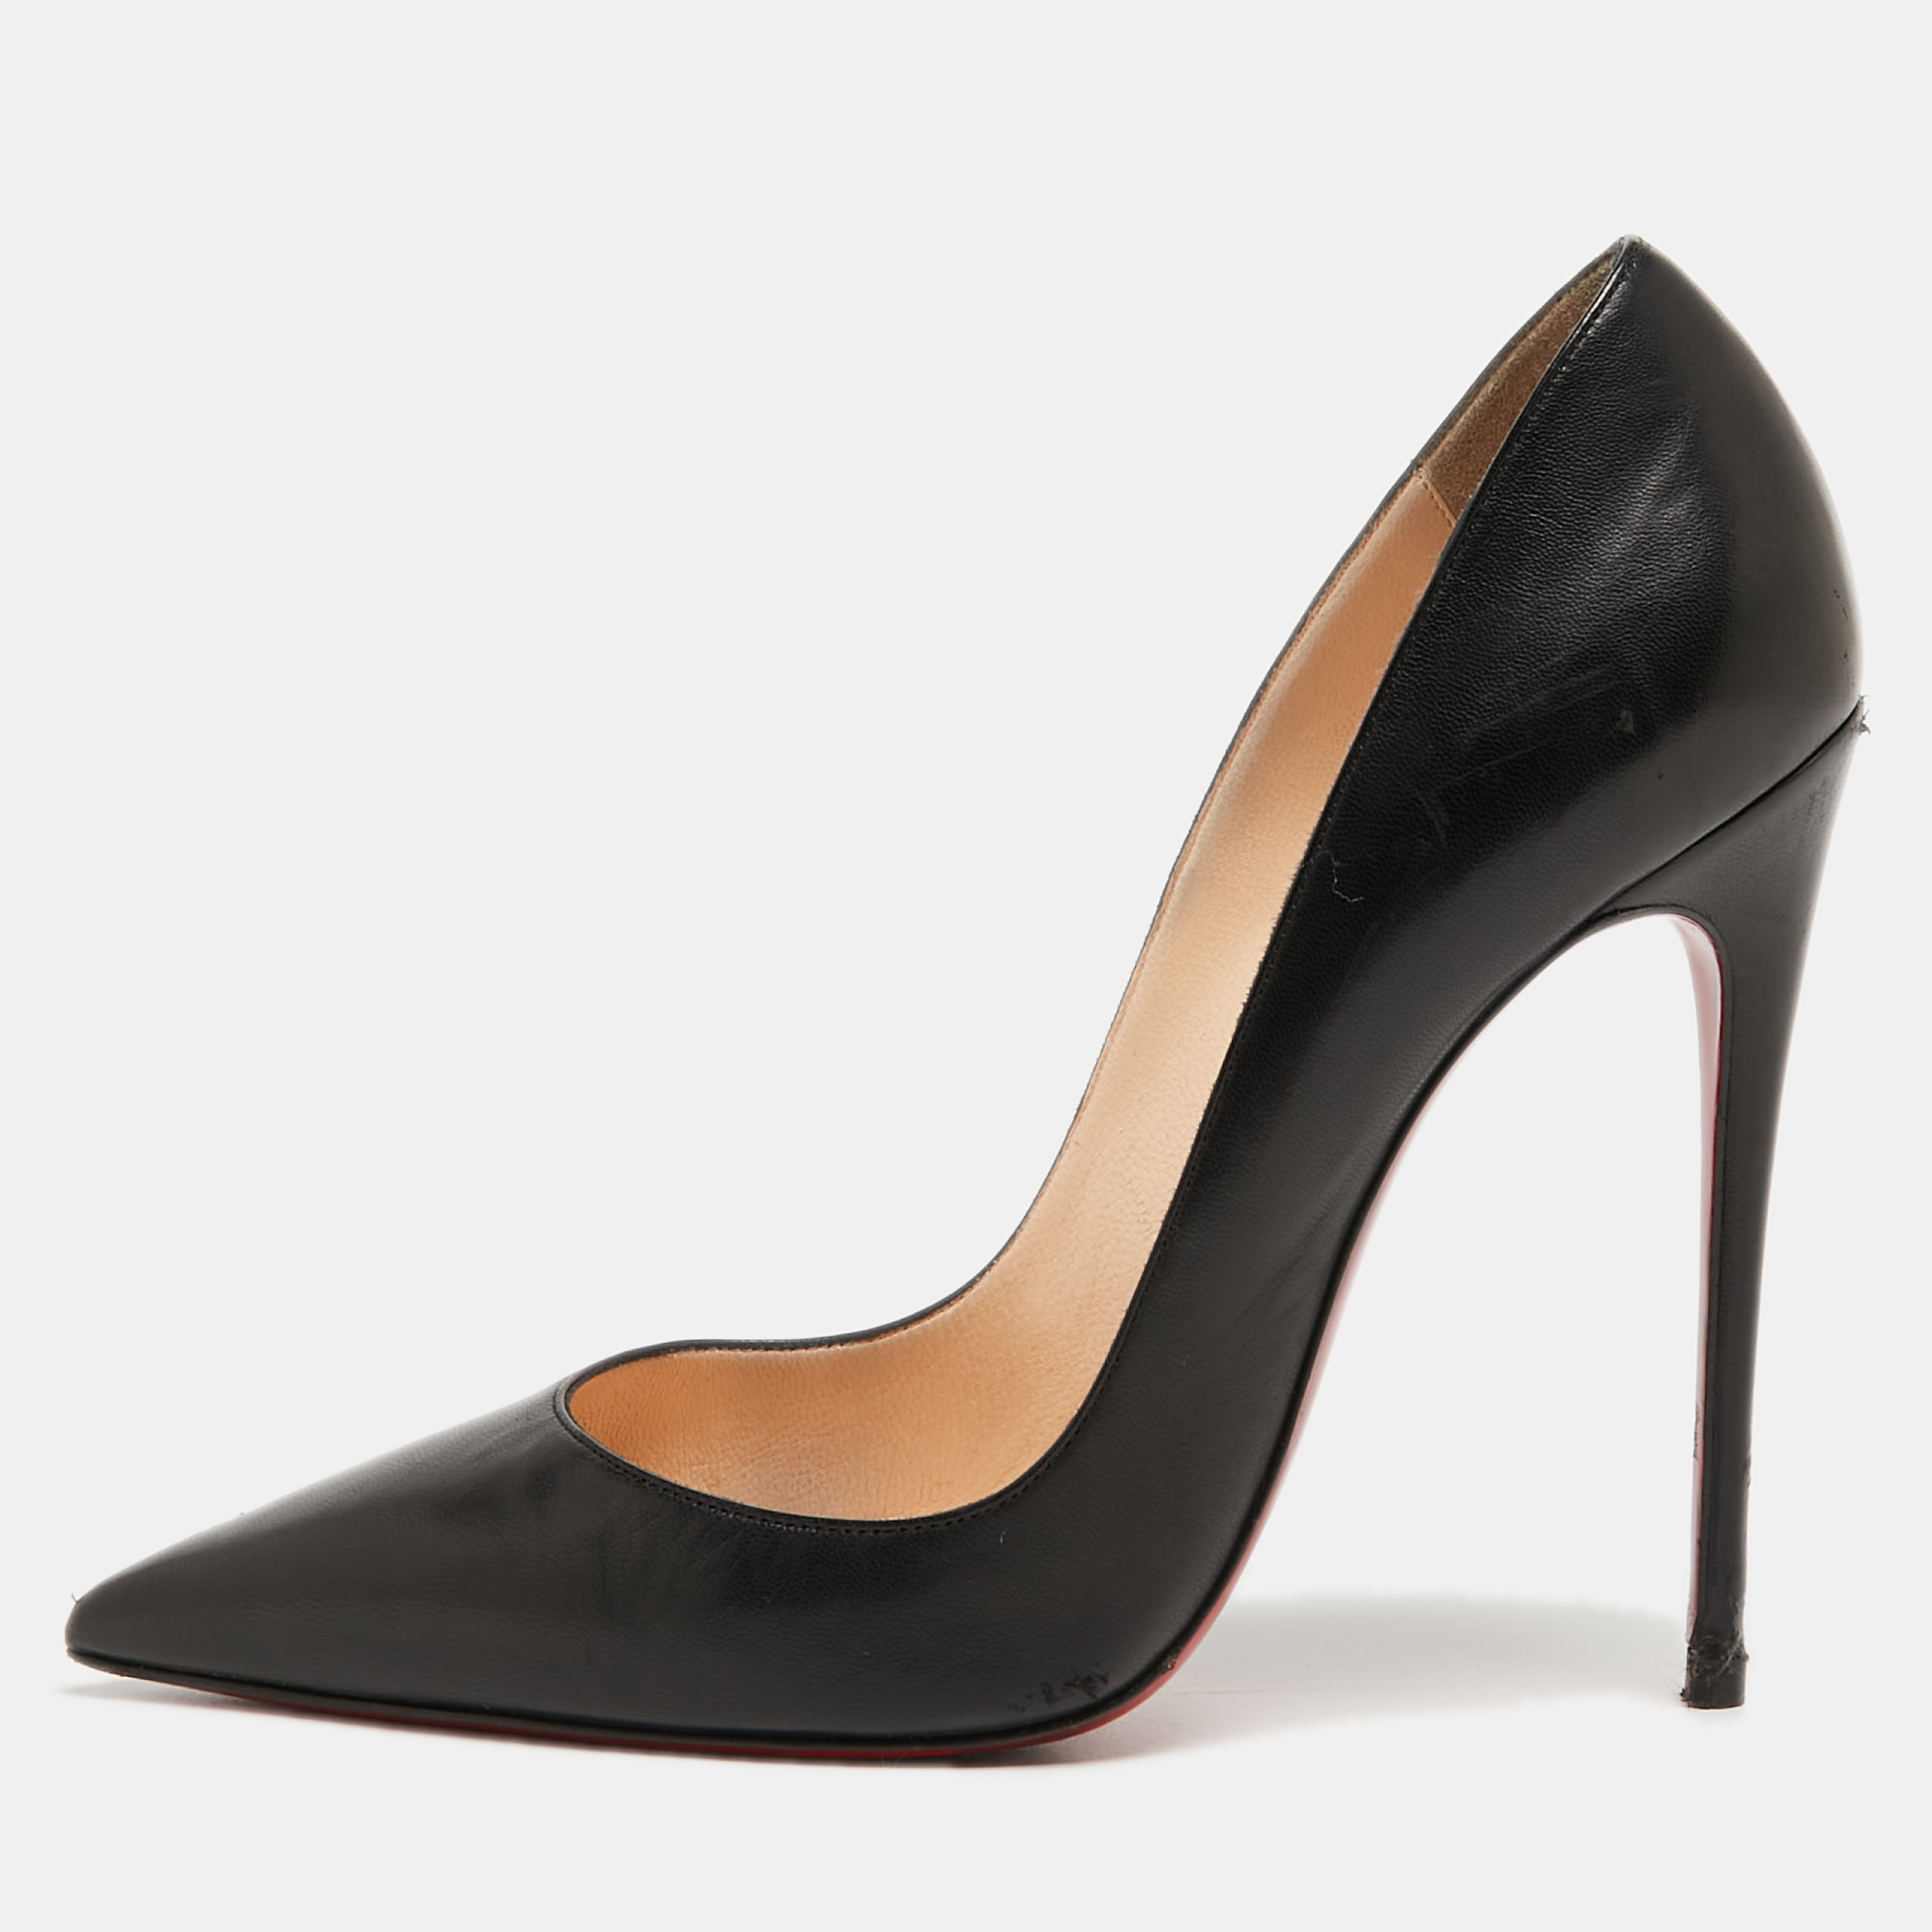 Pre-owned Christian Louboutin Black Leather So Kate Pumps Size 38